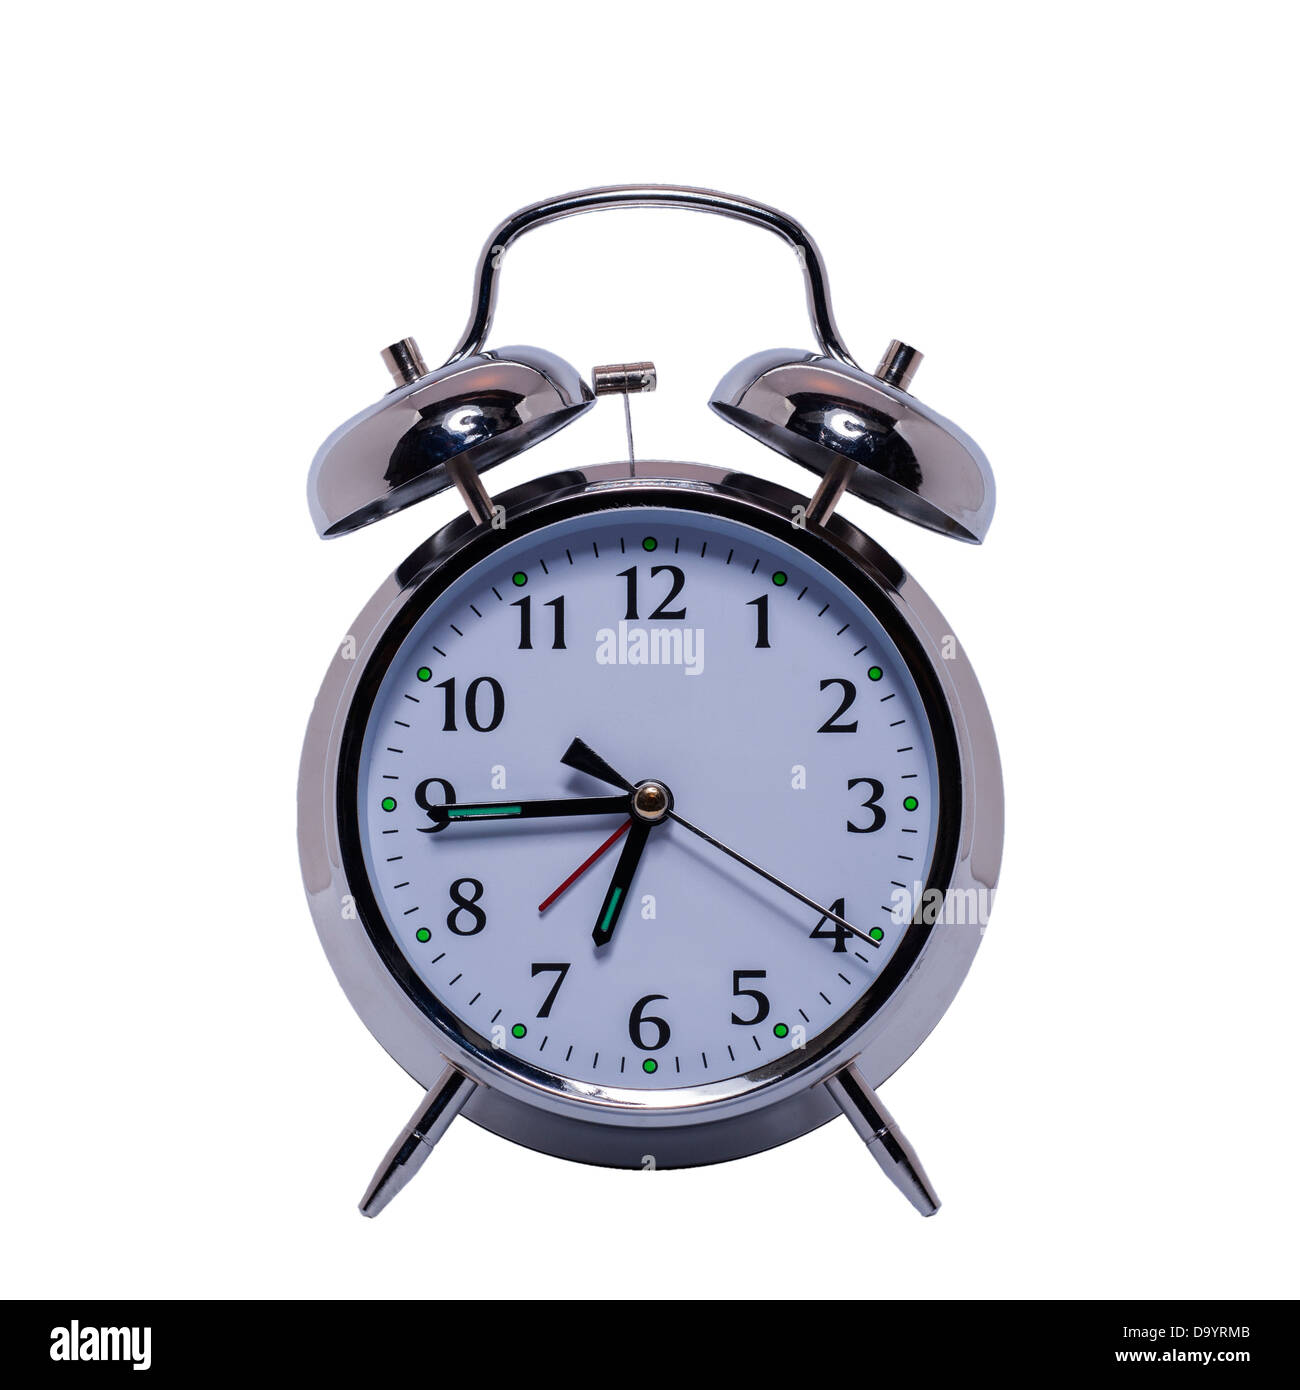 A classic alarm clock on a white background Stock Photo